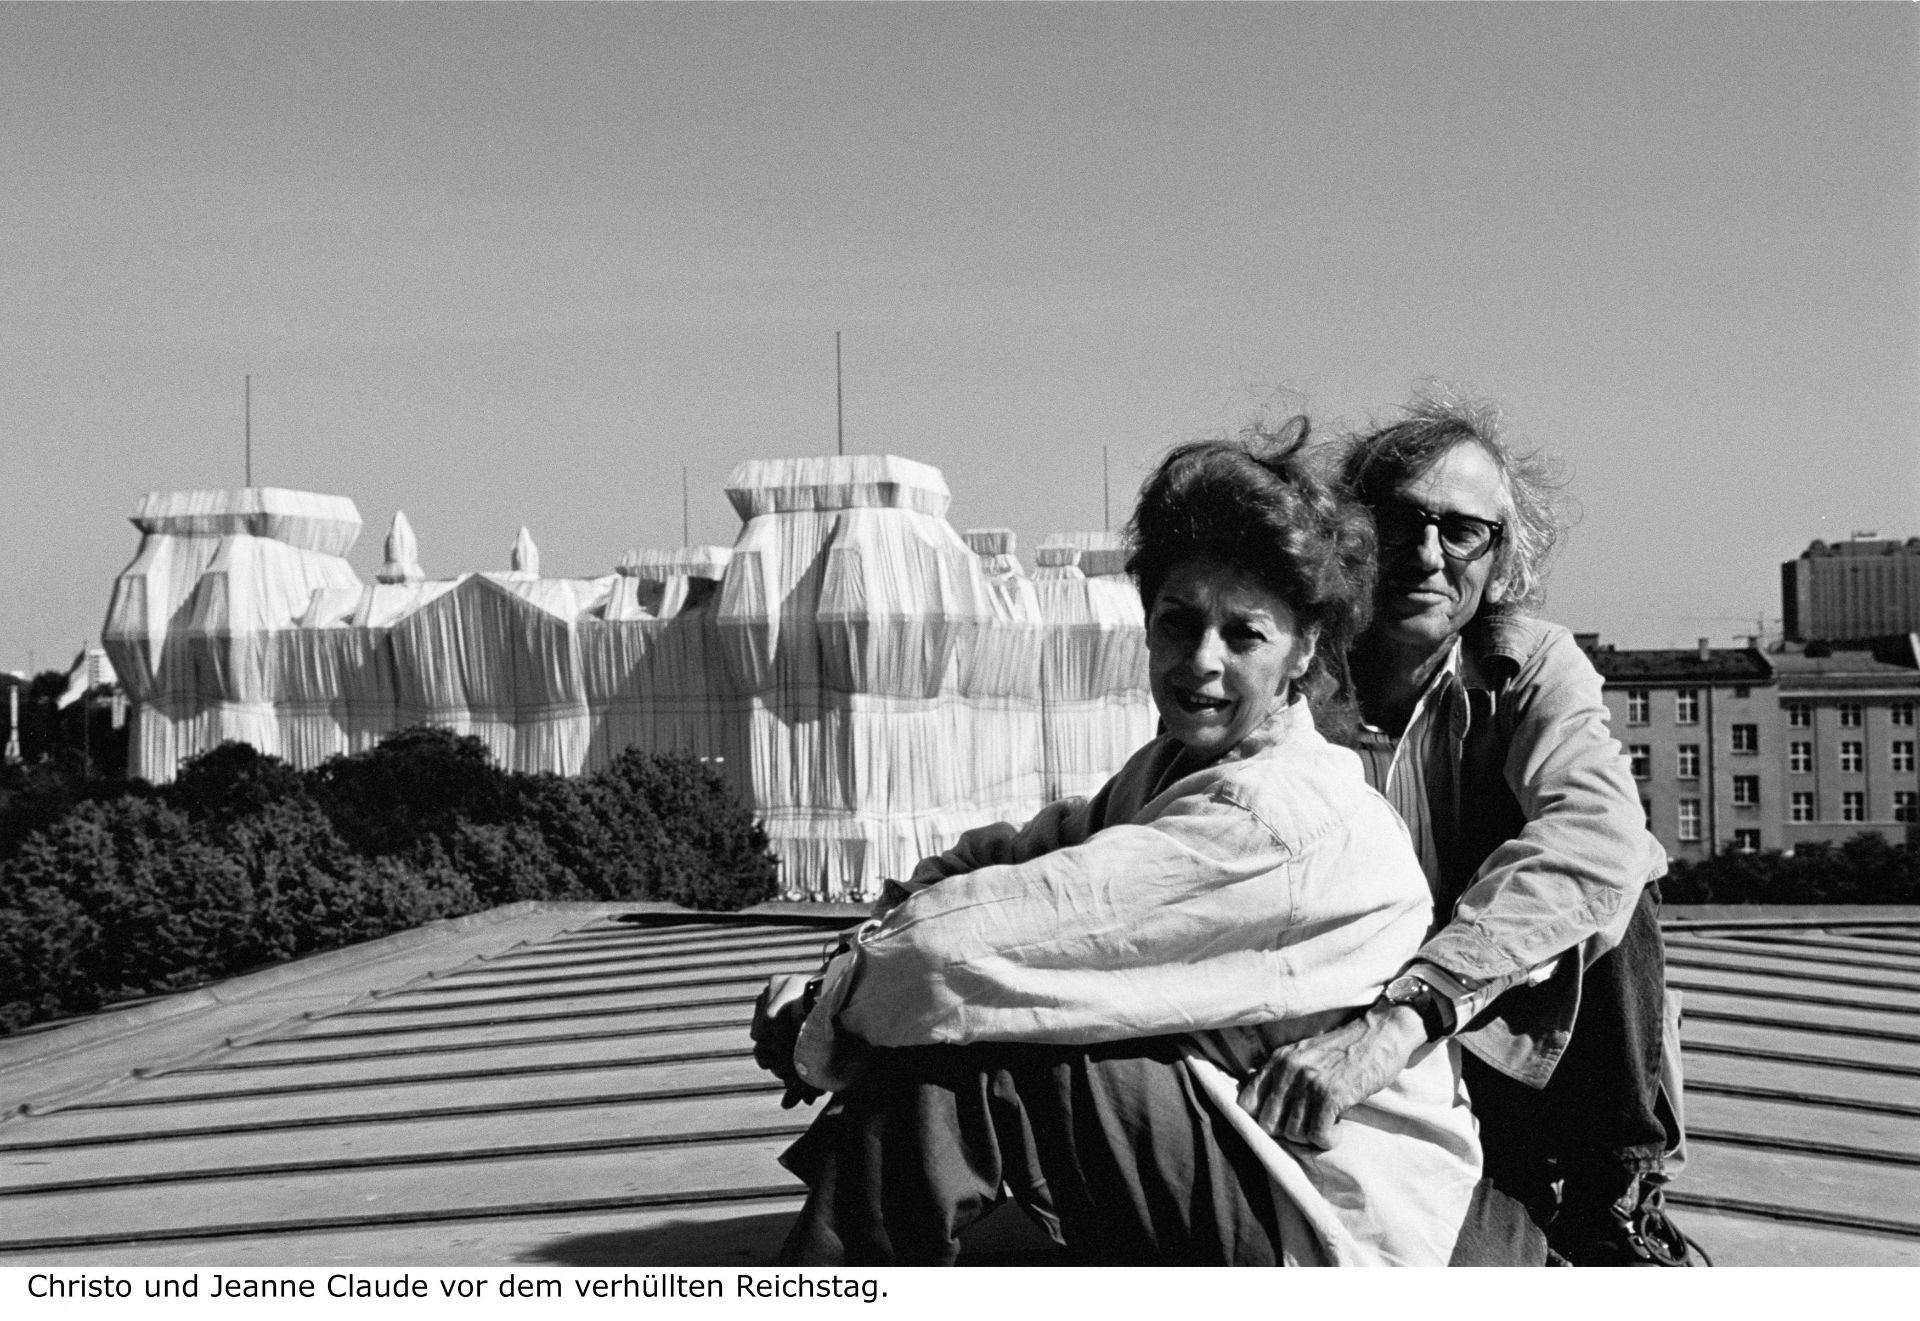 Christo and Jeanne-Claude: Wrapped Reichstag (Project for Der Deutsche Reichstag - Berlin - Image 3 of 3